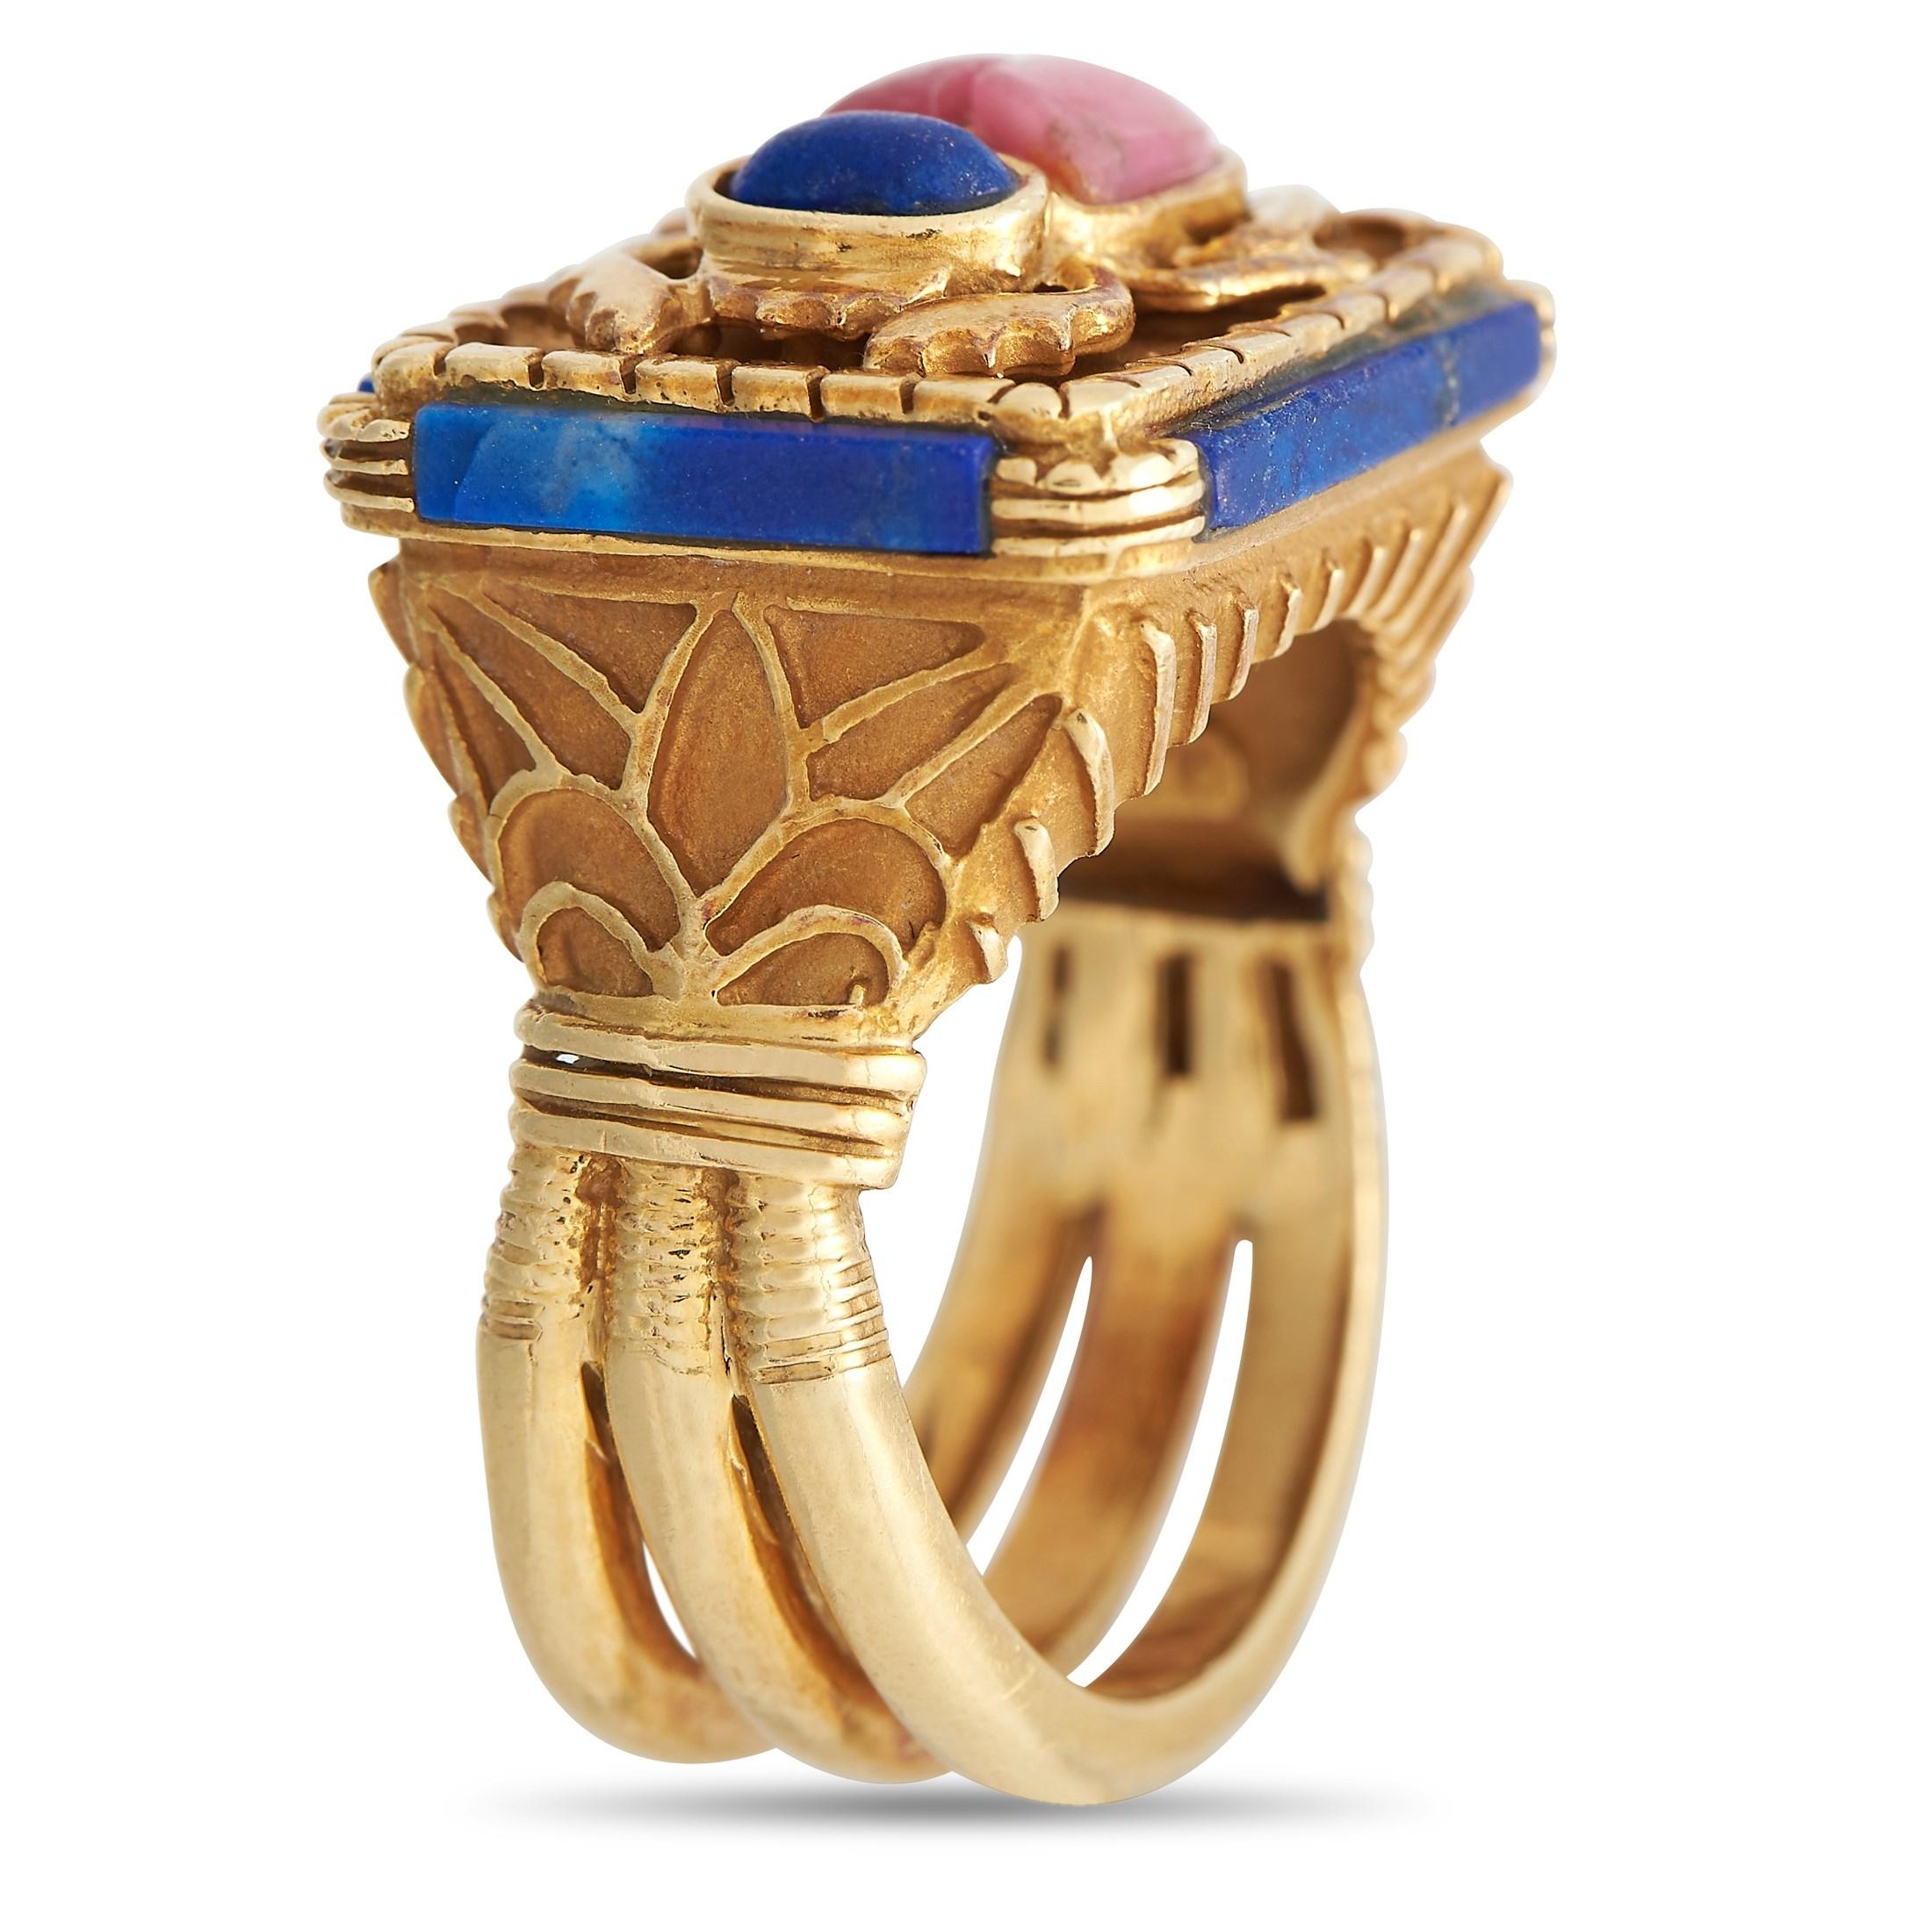 Add character and charm to your style with this LB Exclusive 18K Yellow Gold Lapis and Rhodochrosite Scarab Ring. It features an 8mm band topped with a 17x20mm yellow gold plate with an intense blue lapis lazuli border and a sculpted Scarab Beetle